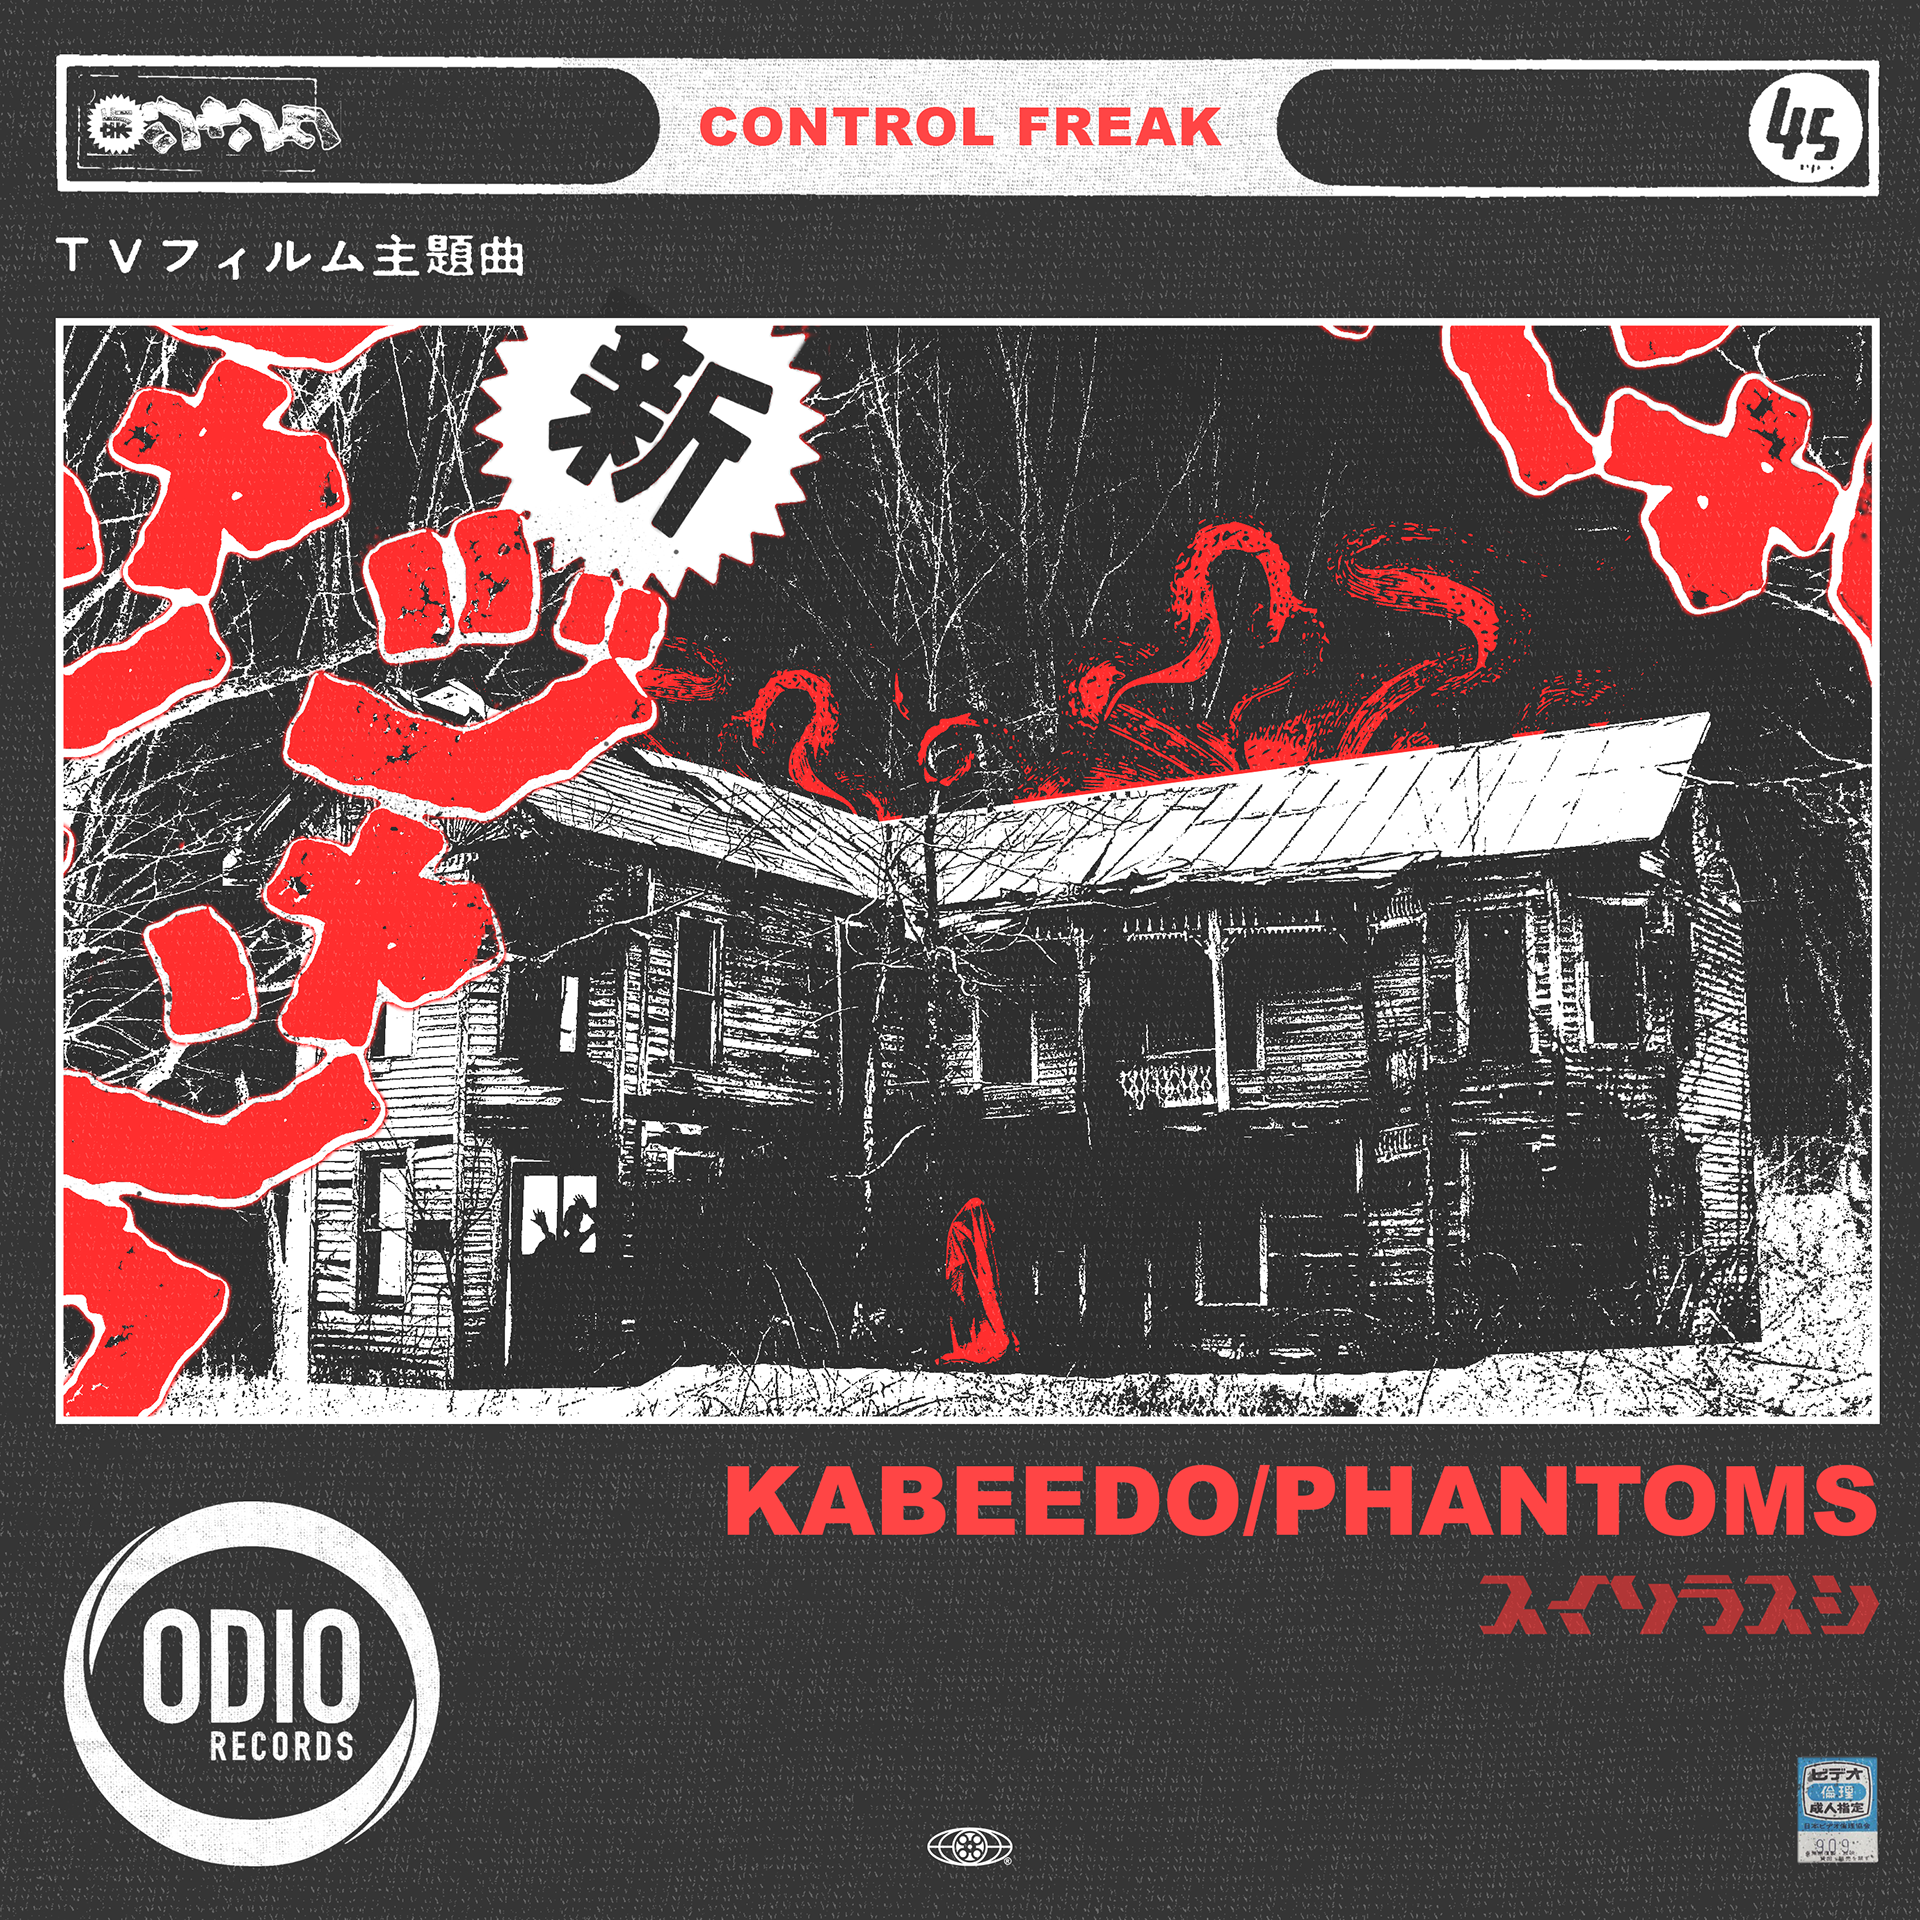 Disappointment tool table Sky Roses Art - Control Freak - Kabeedo/Phantoms (Odio Records)